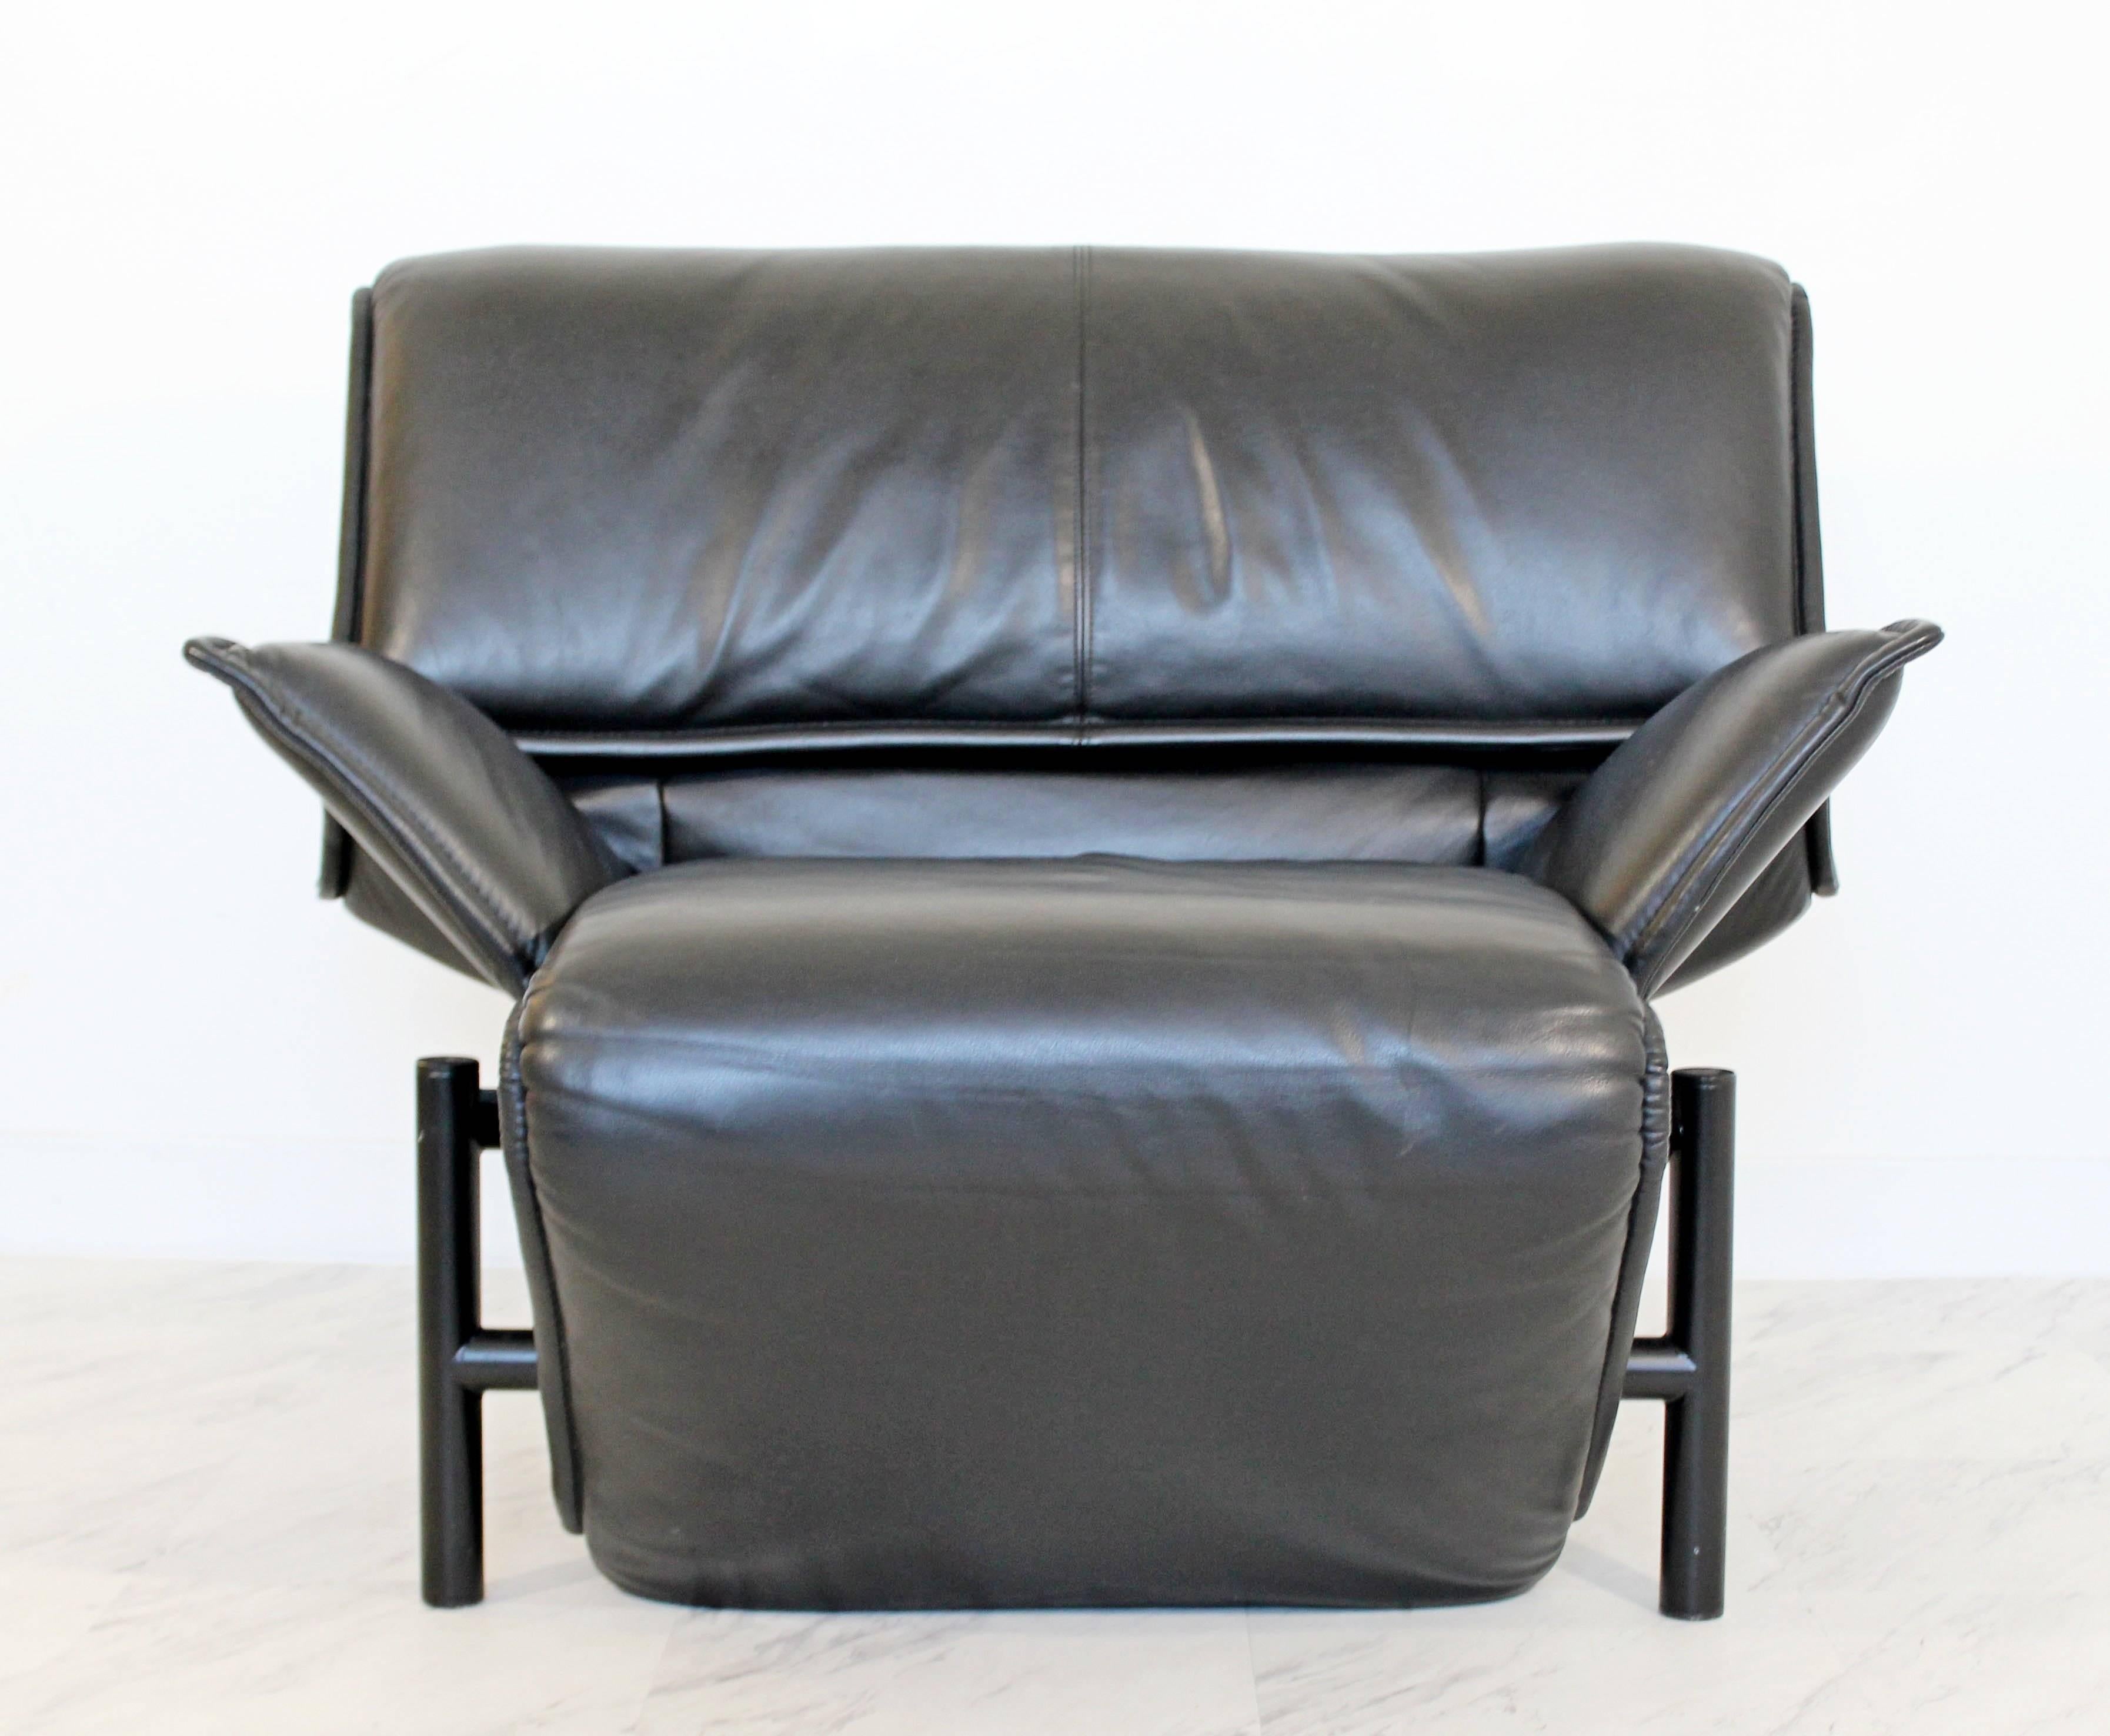 For your consideration is a magnificent, folding and reclining, lounge chair, in black leather, by Vico Magistretti for Cassina. In excellent condition. The dimensions are 35